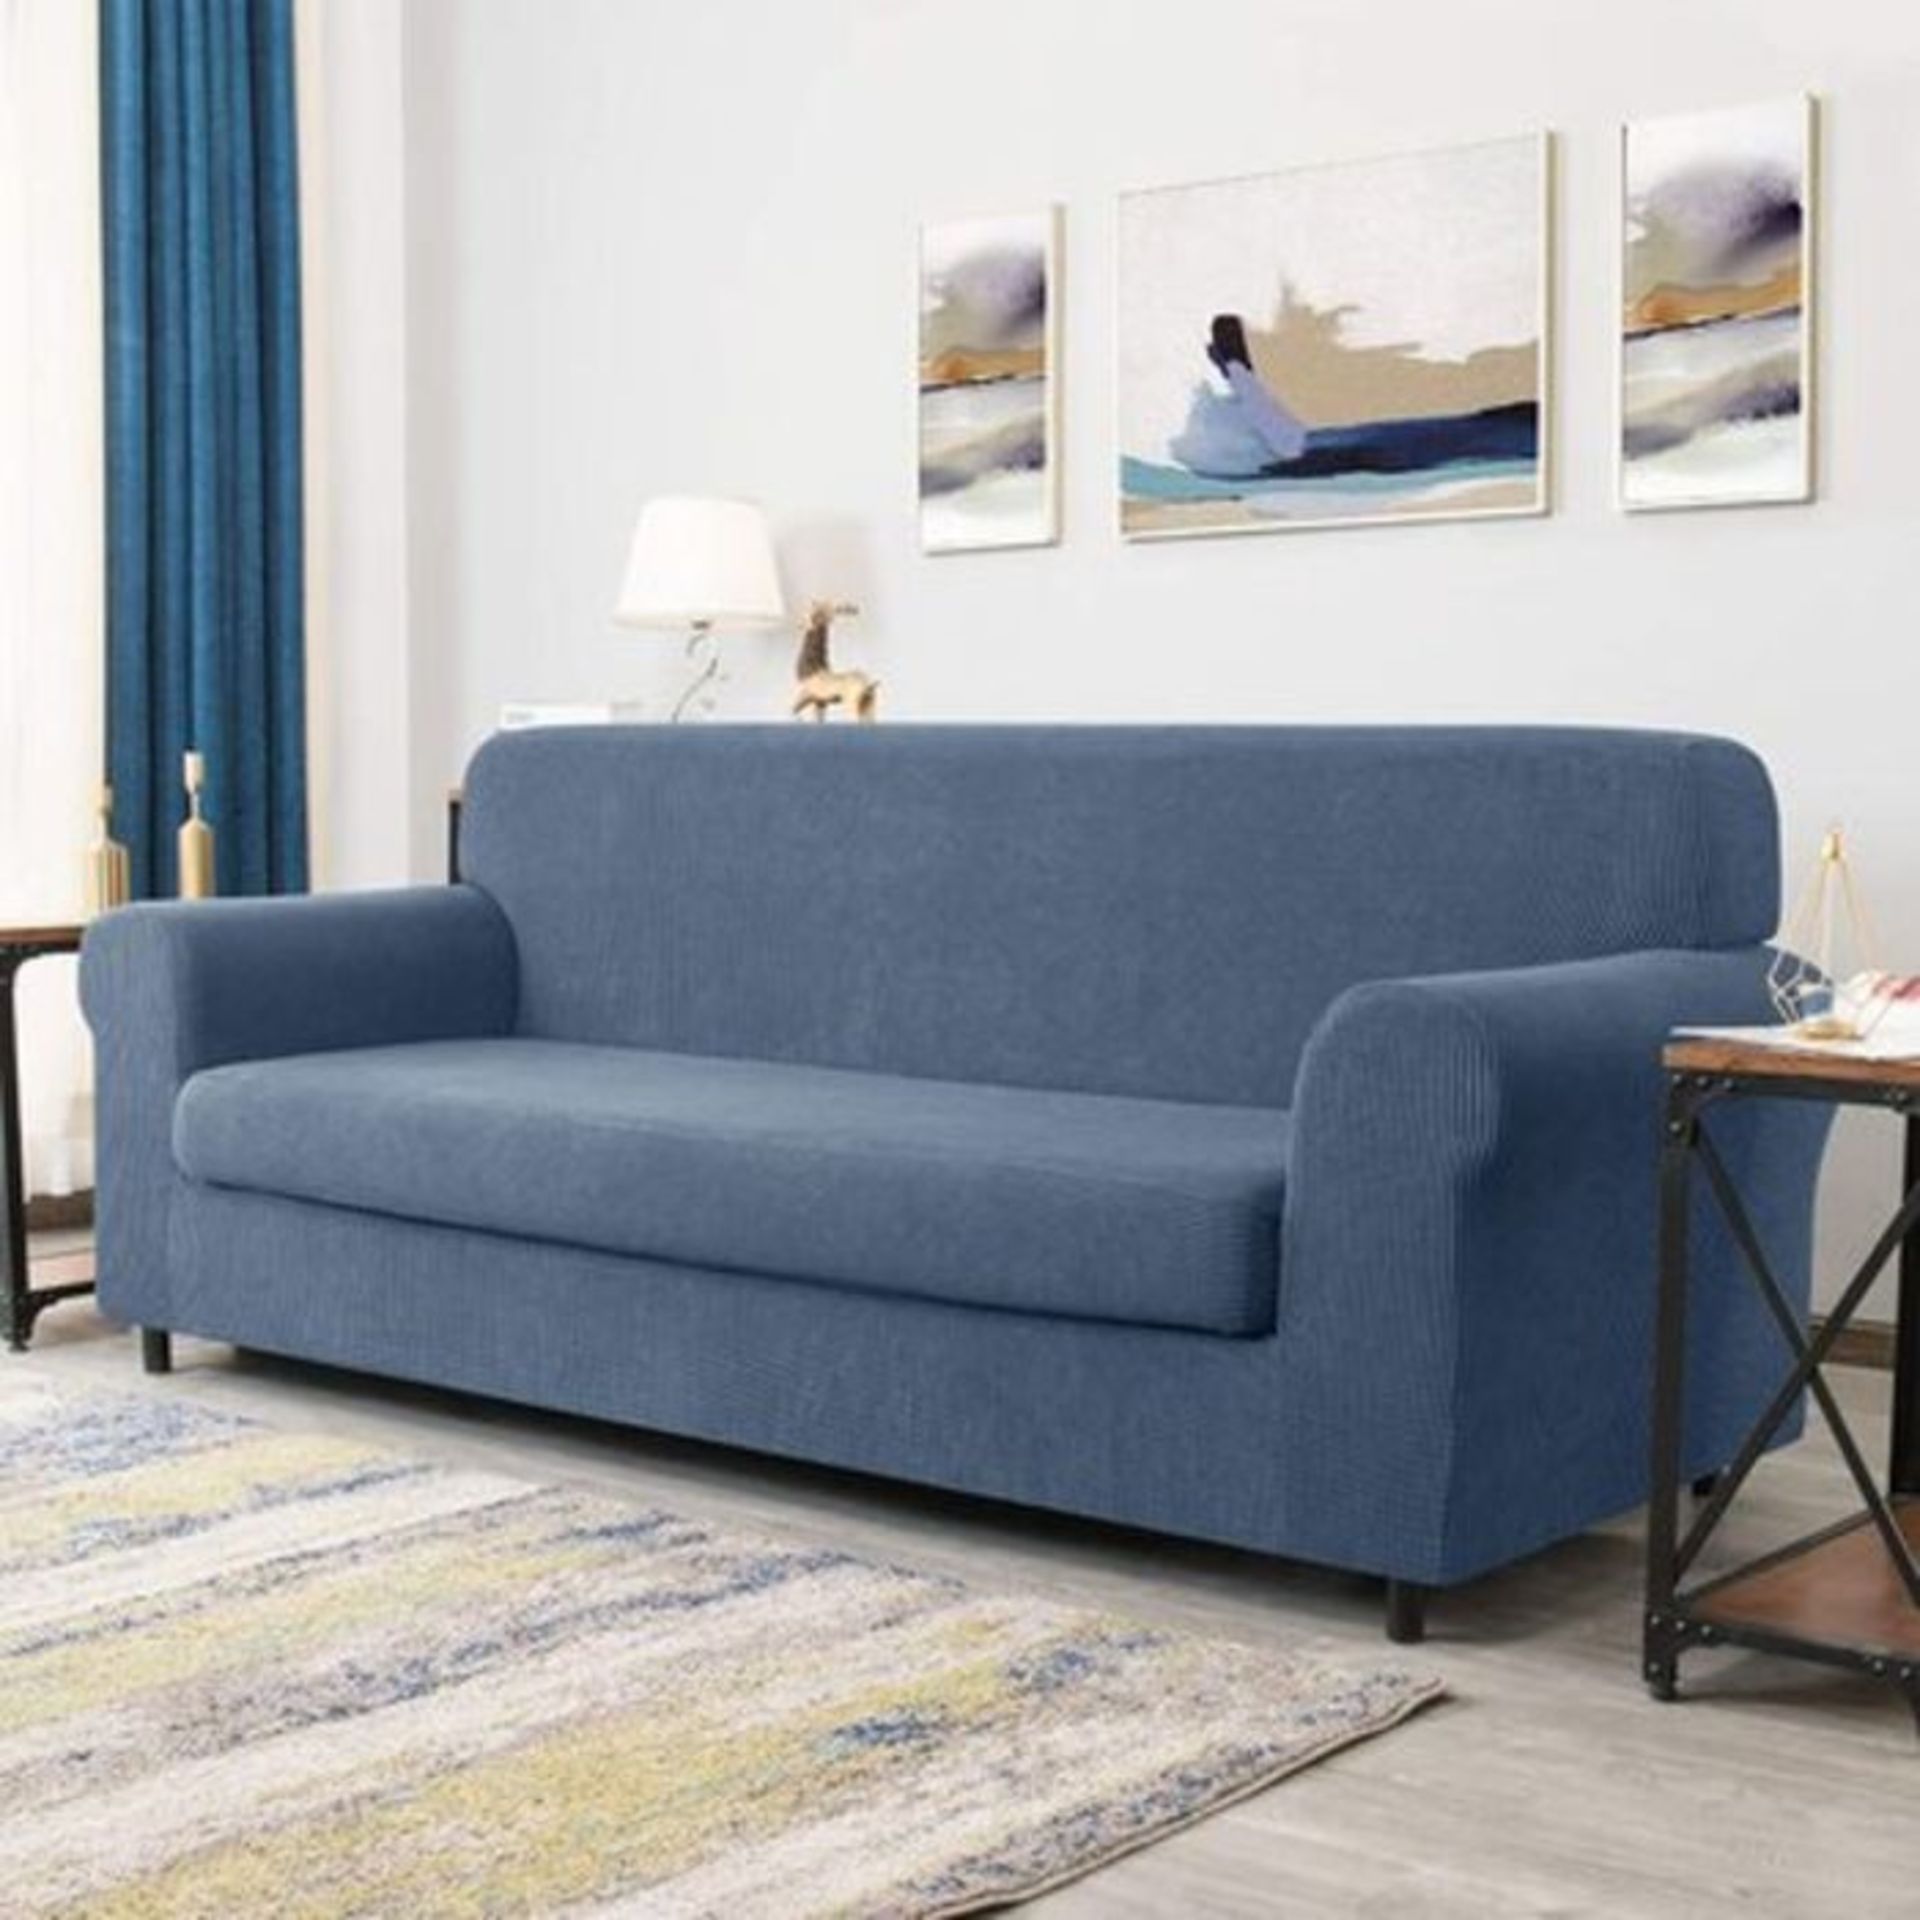 17 Stories, Textured Grid Stretchy Removable Box Cushion Loveseat Slipcover Denim Blue - RRP £48.99